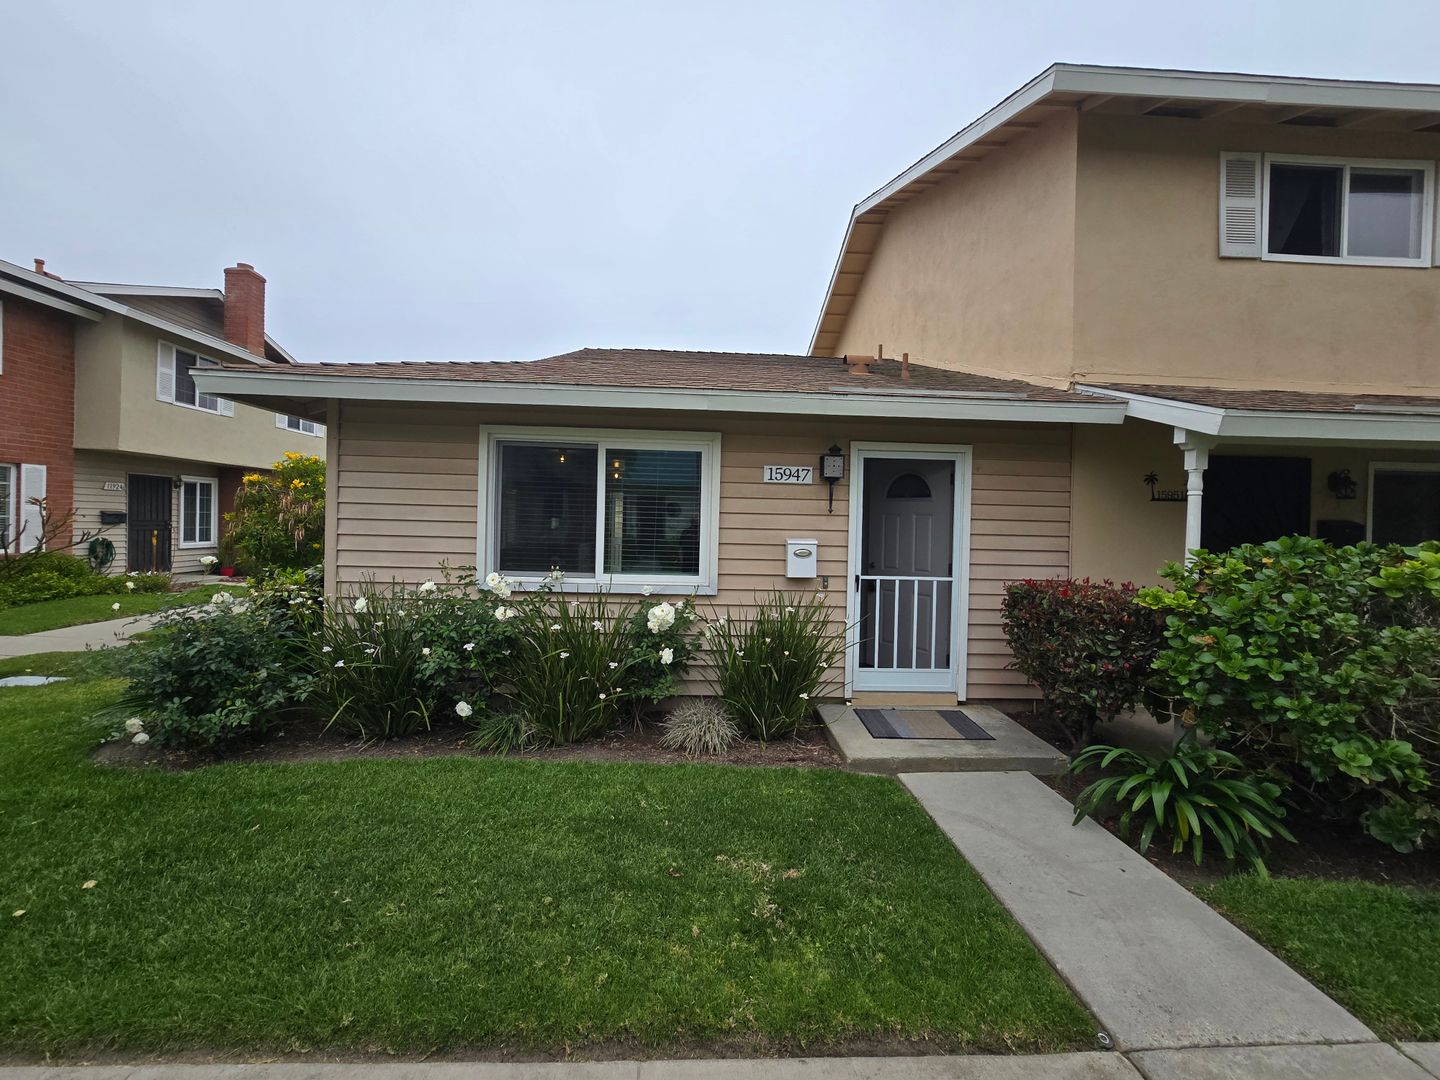 Harbor Valley Community: 1 Bedroom 1 Bath Single Story Attached End Unit,